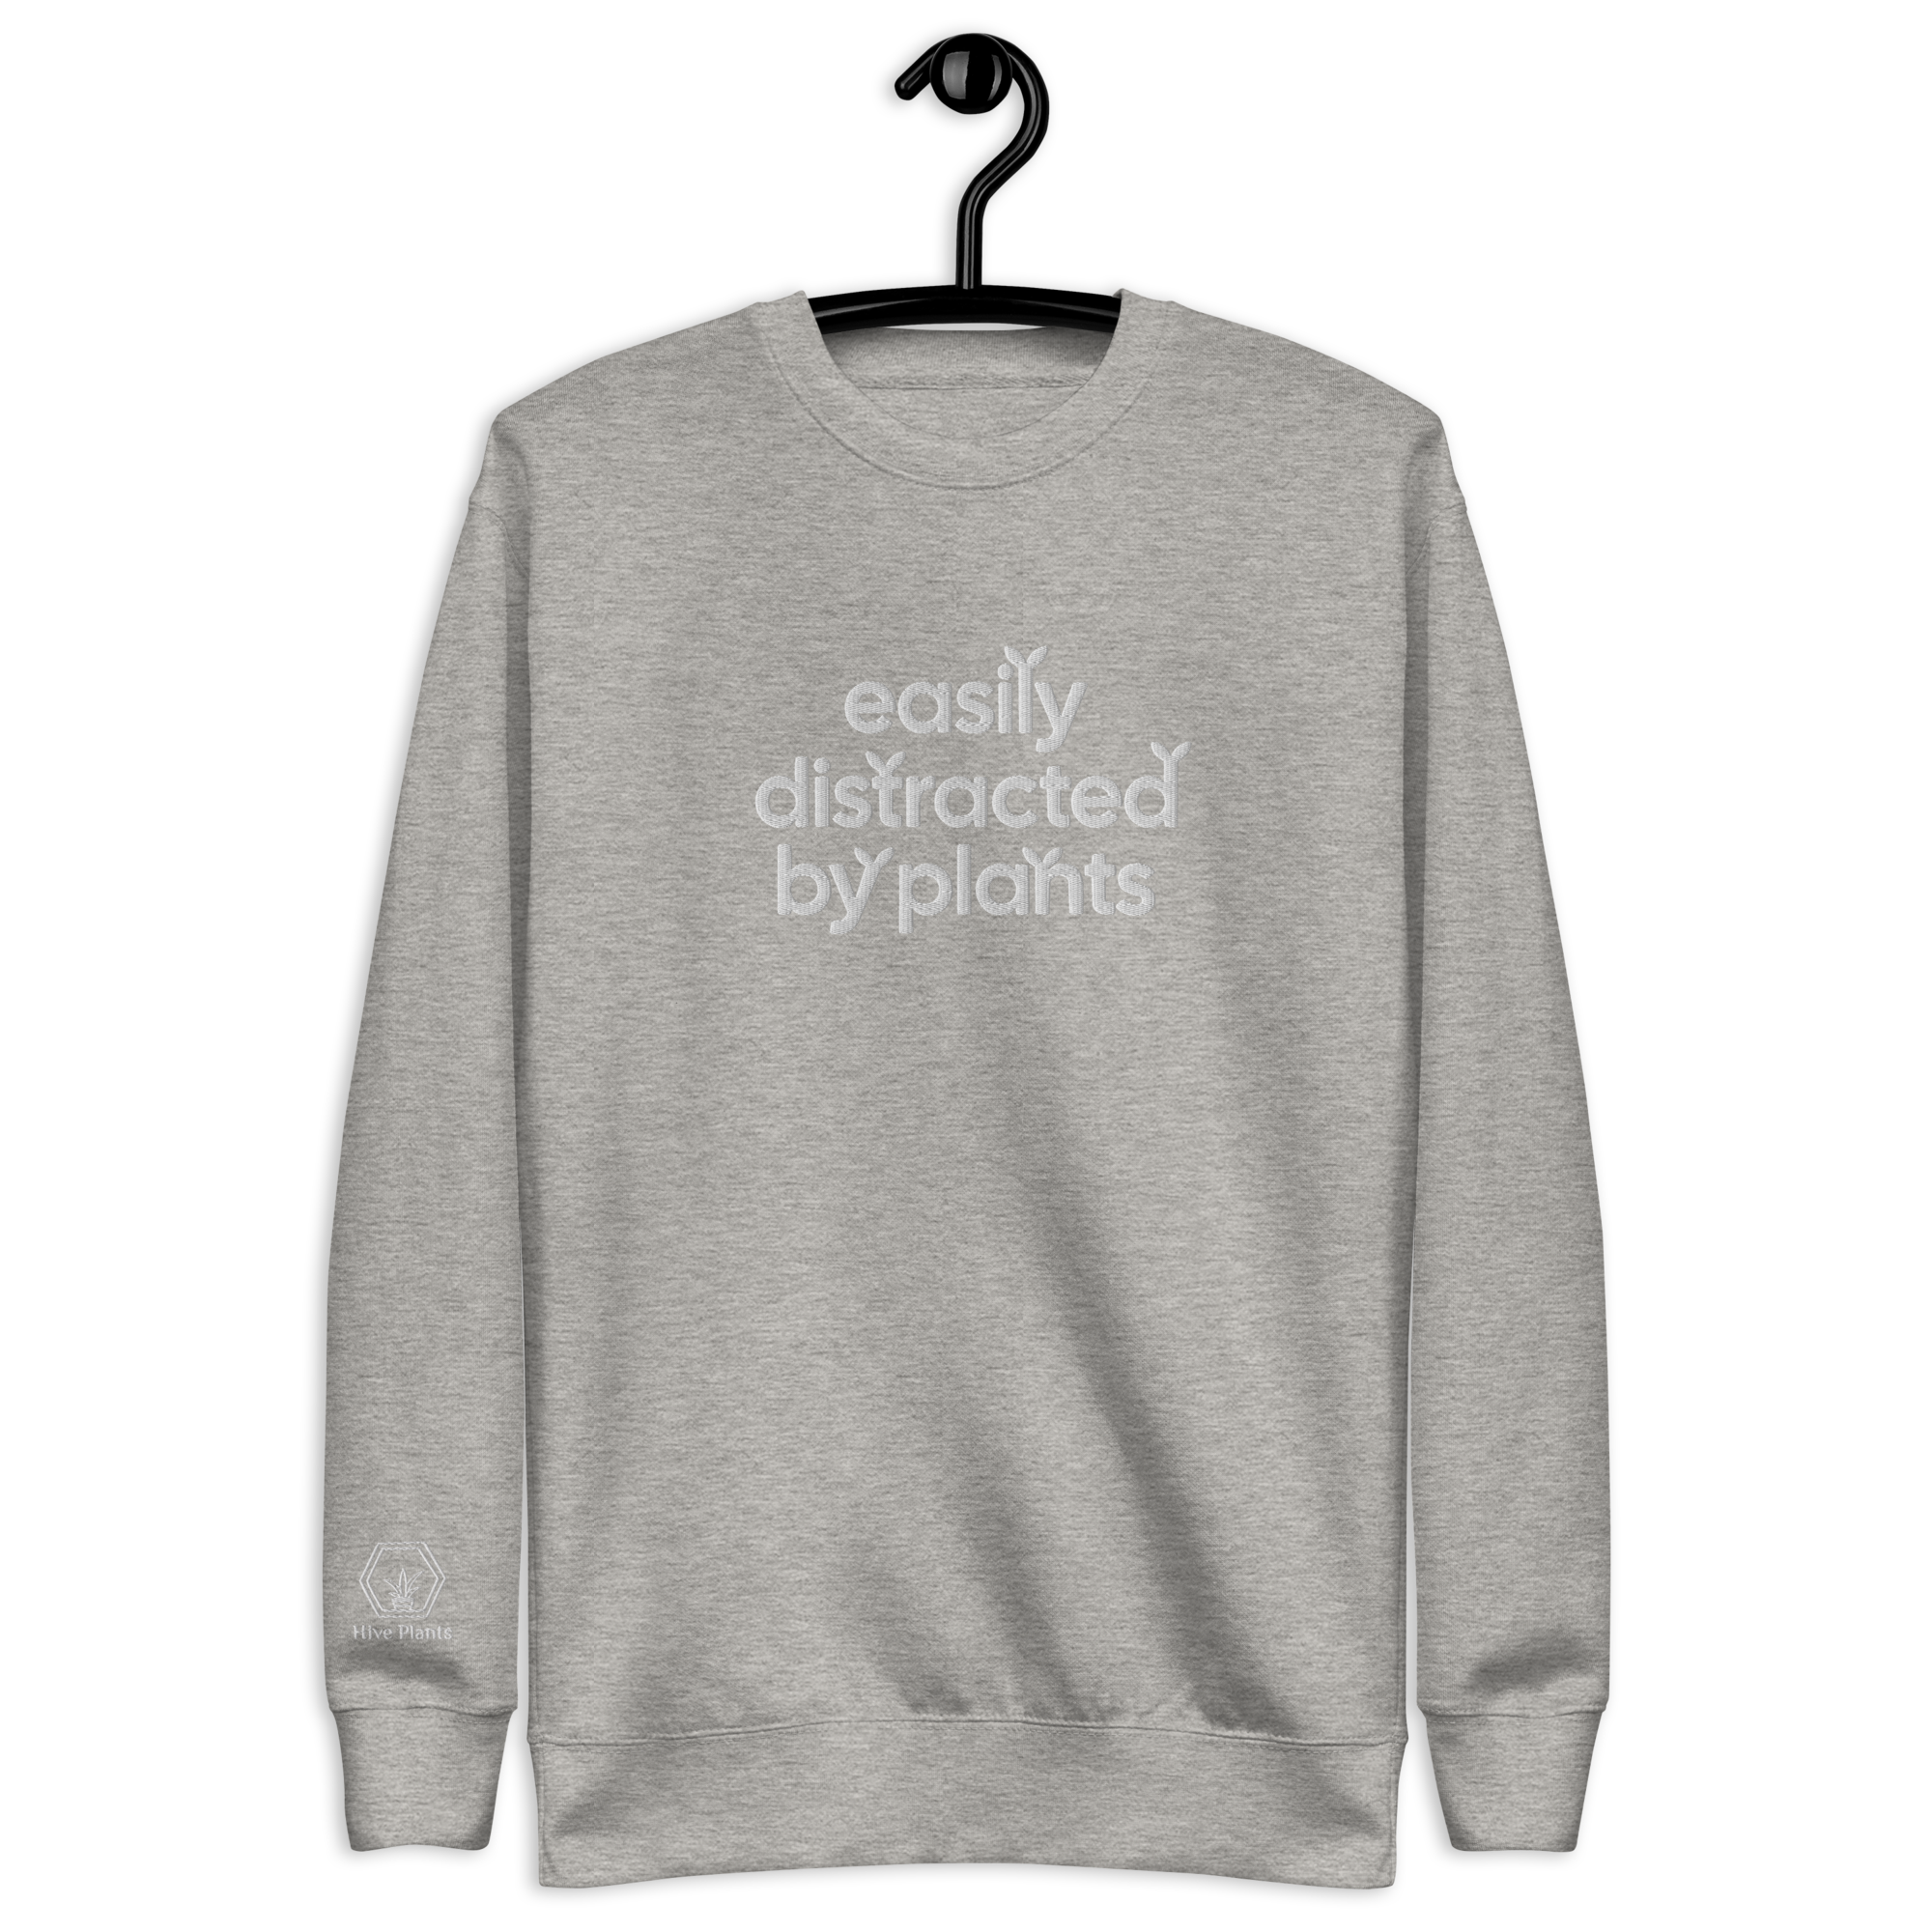 Easily Distracted By Plants Sweatshirt - The White Oak Collection - 